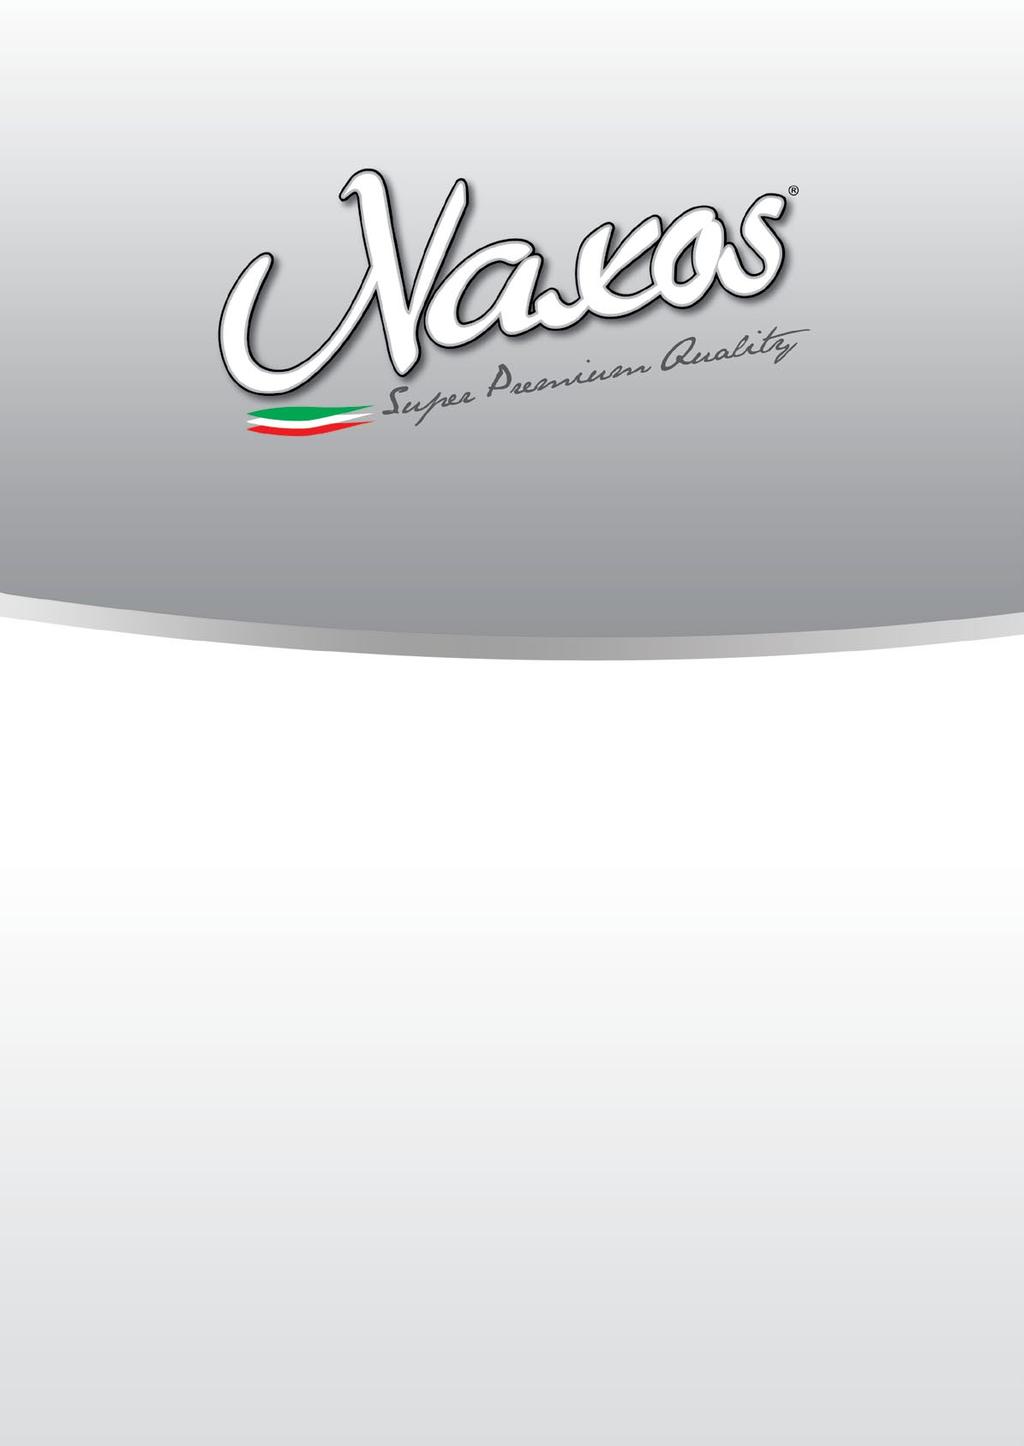 Naxos is the Superpremium line for dogs studied by Adragna Pet Food thanks to its experience of many years in animal nutrition to meet the different tastes and nutritional needs of dogs of all sizes